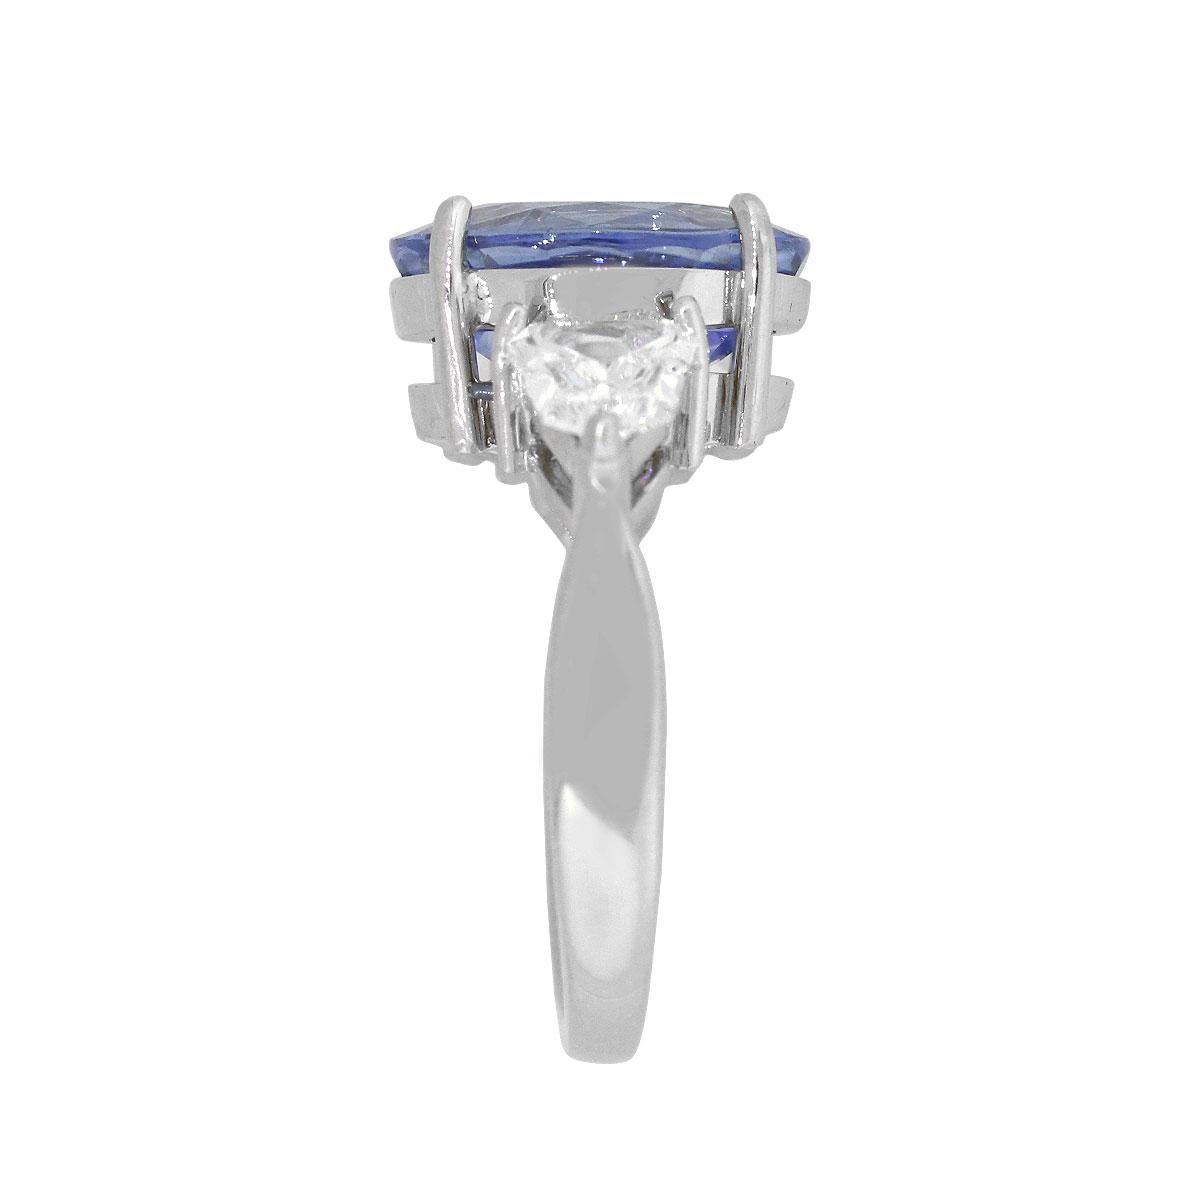 Material: 14k White Gold
Sapphire Details: Approx. 6.13ct Oval cut sapphire. GIA # 2205332124
Adjacent Diamond Details: Approx. 1ctw kite cut diamonds. Diamonds are G/H in color and VS in clarity
Ring Size: 6.75
Total Weight: 6.8g(4.3dwt)
Ring